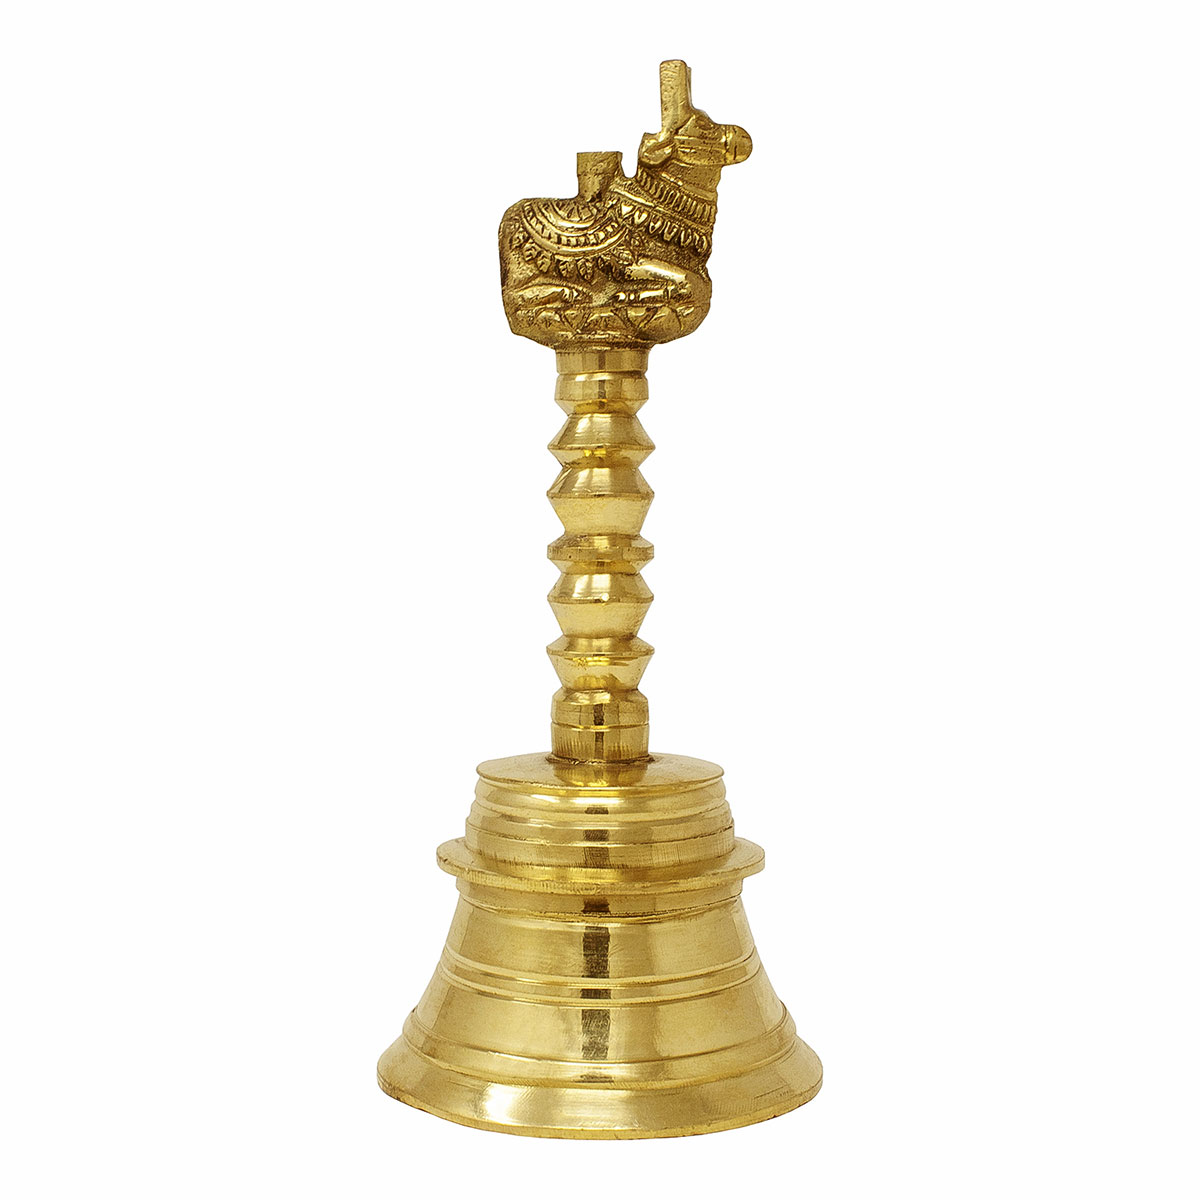 Brass Nandhi Pooja Hand Bell, Artisan Crafted for Puja, Home Décoration and Gifting (4.5 Inch Height)